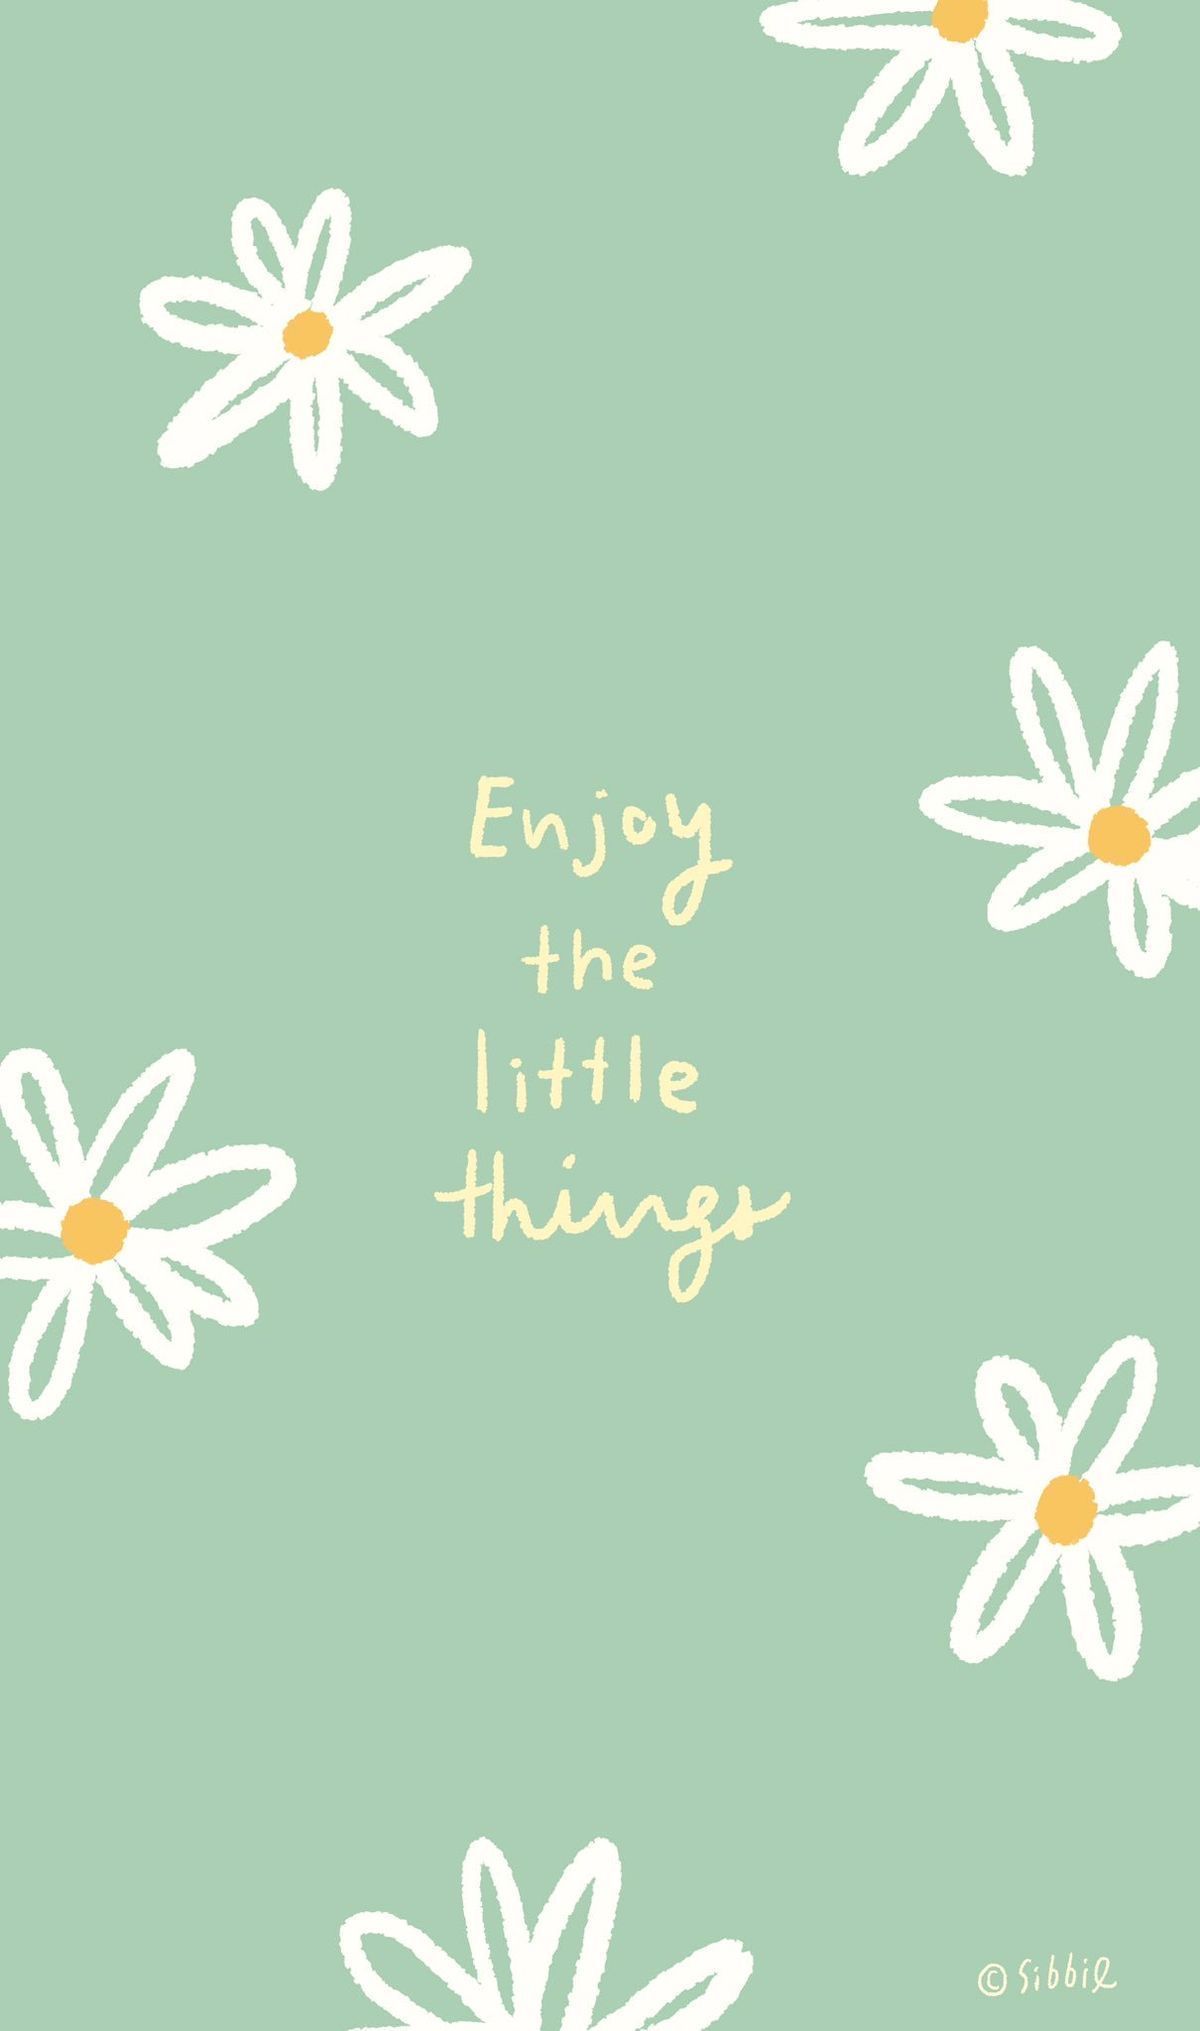 Enjoy the little things wallpaper background phone background - IPad